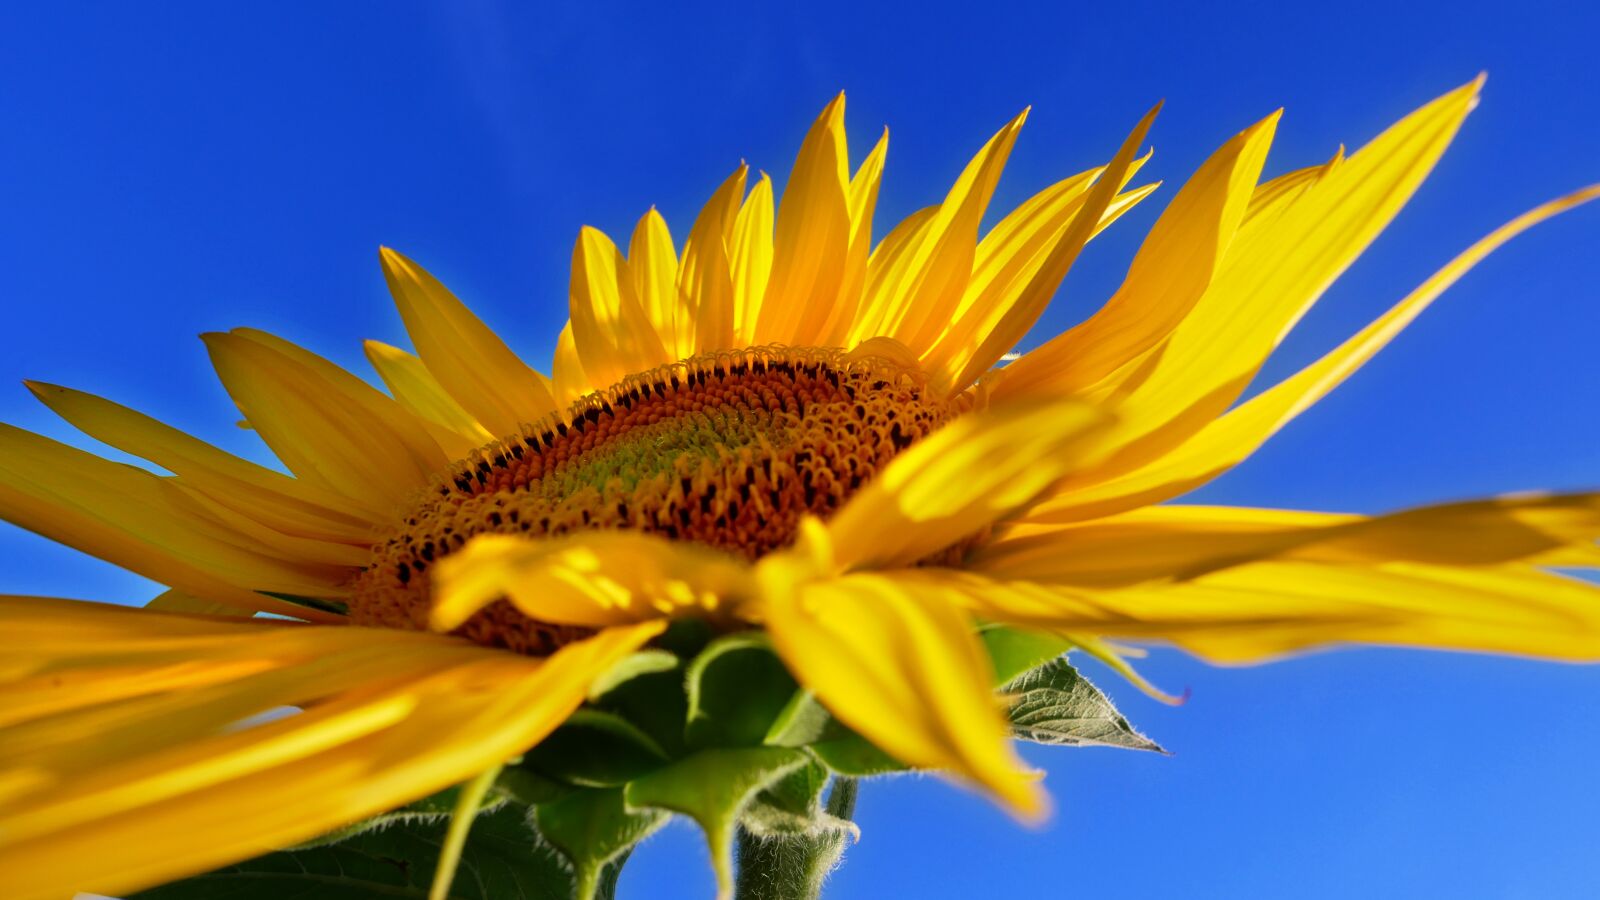 Panasonic Lumix DMC-GX85 (Lumix DMC-GX80 / Lumix DMC-GX7 Mark II) sample photo. Sunflower, field, agriculture photography